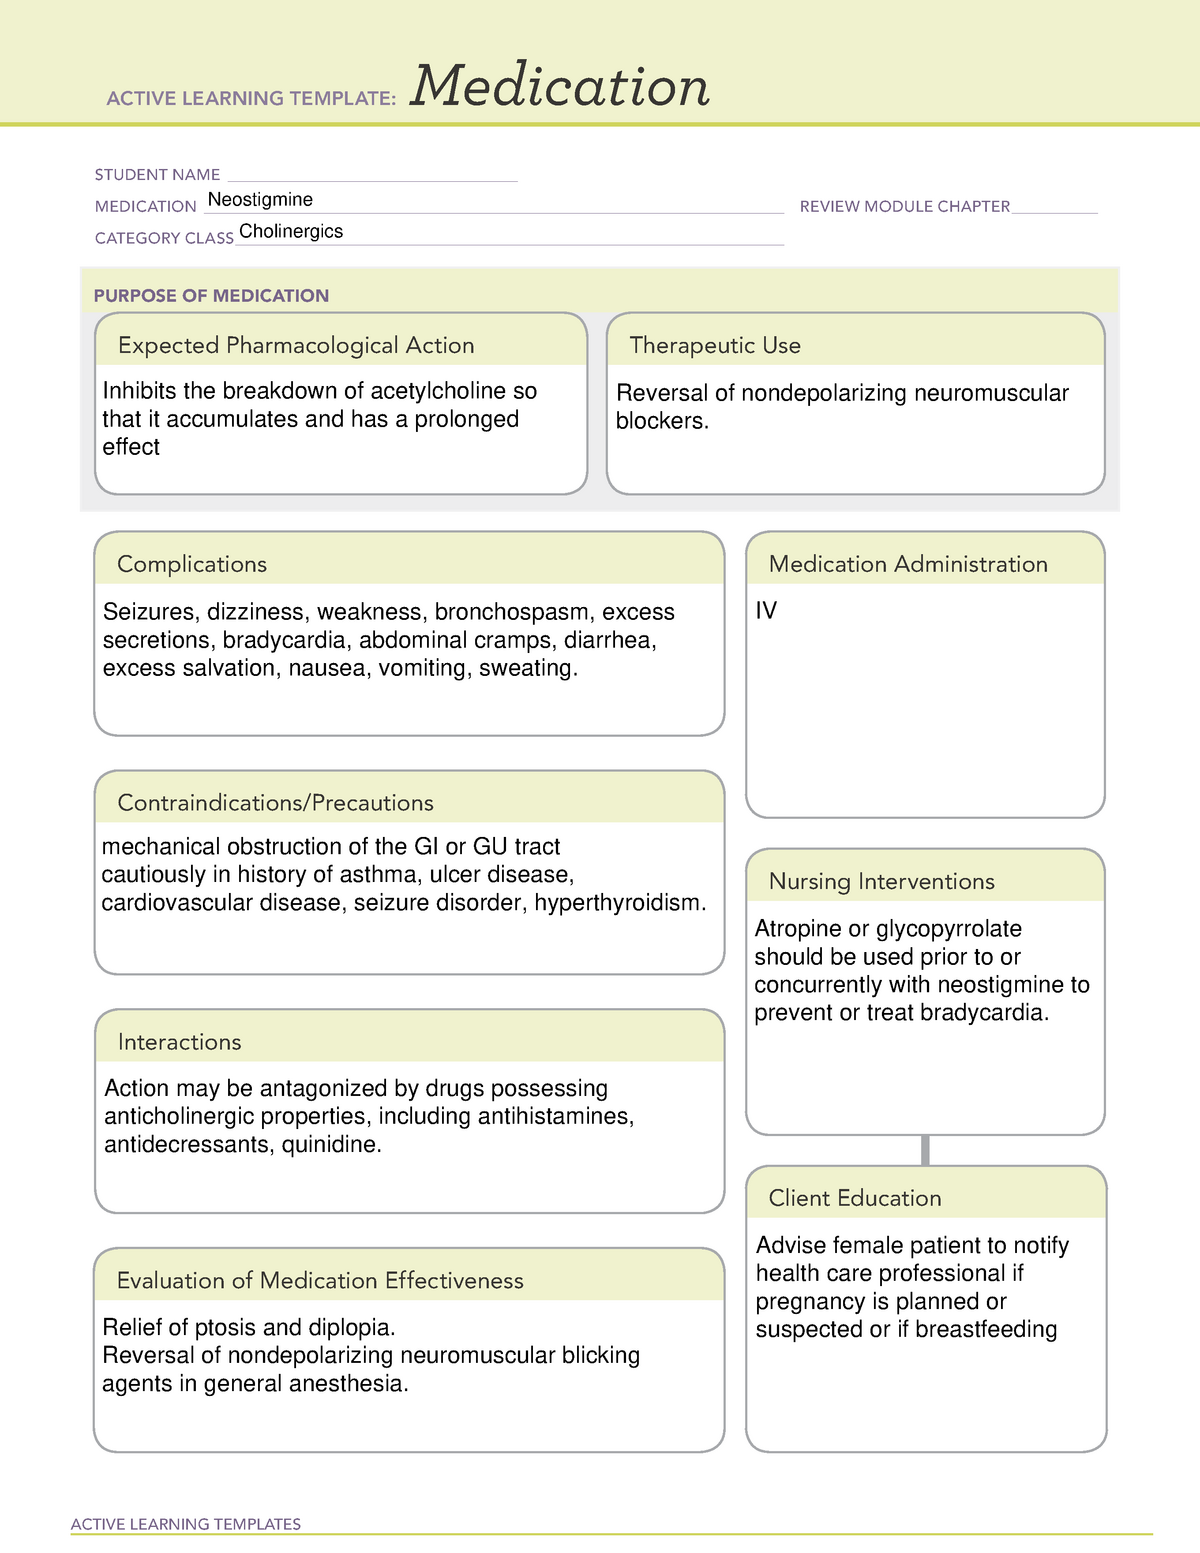 active learning Medication Neostigmine 2021 ACTIVE LEARNING